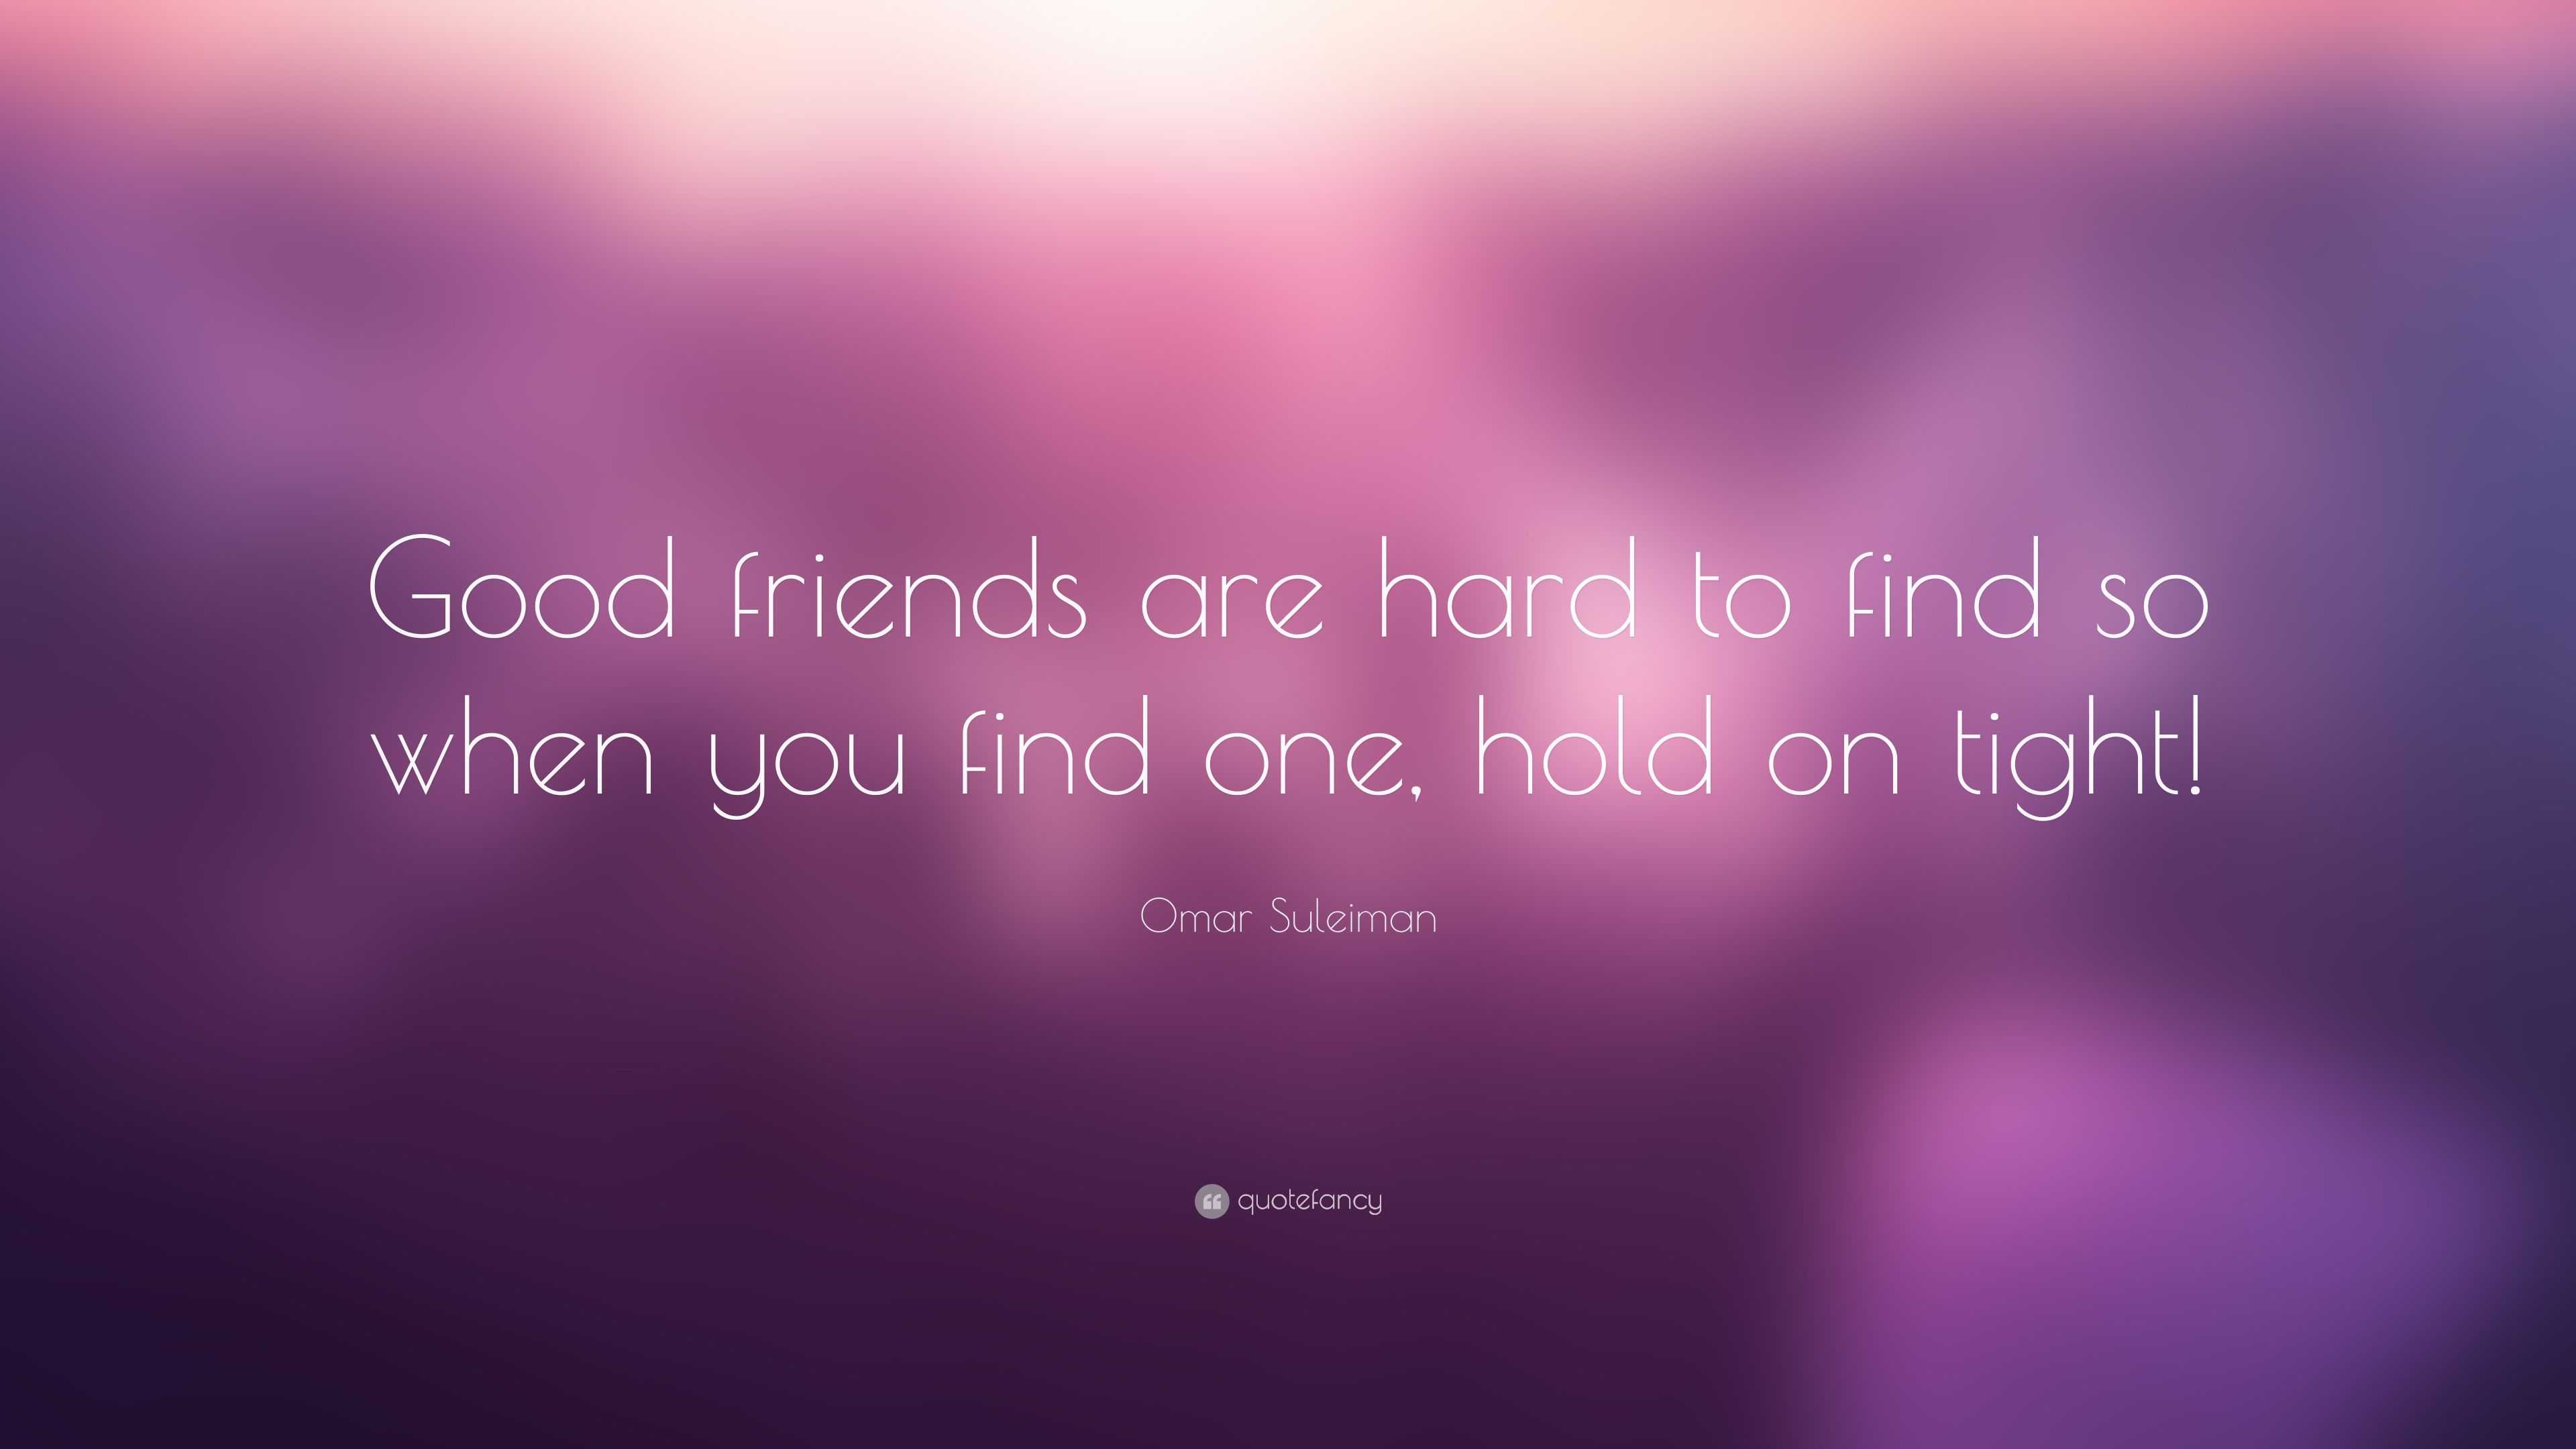 Omar Suleiman Quote: “Good friends are hard to find so when you find ...